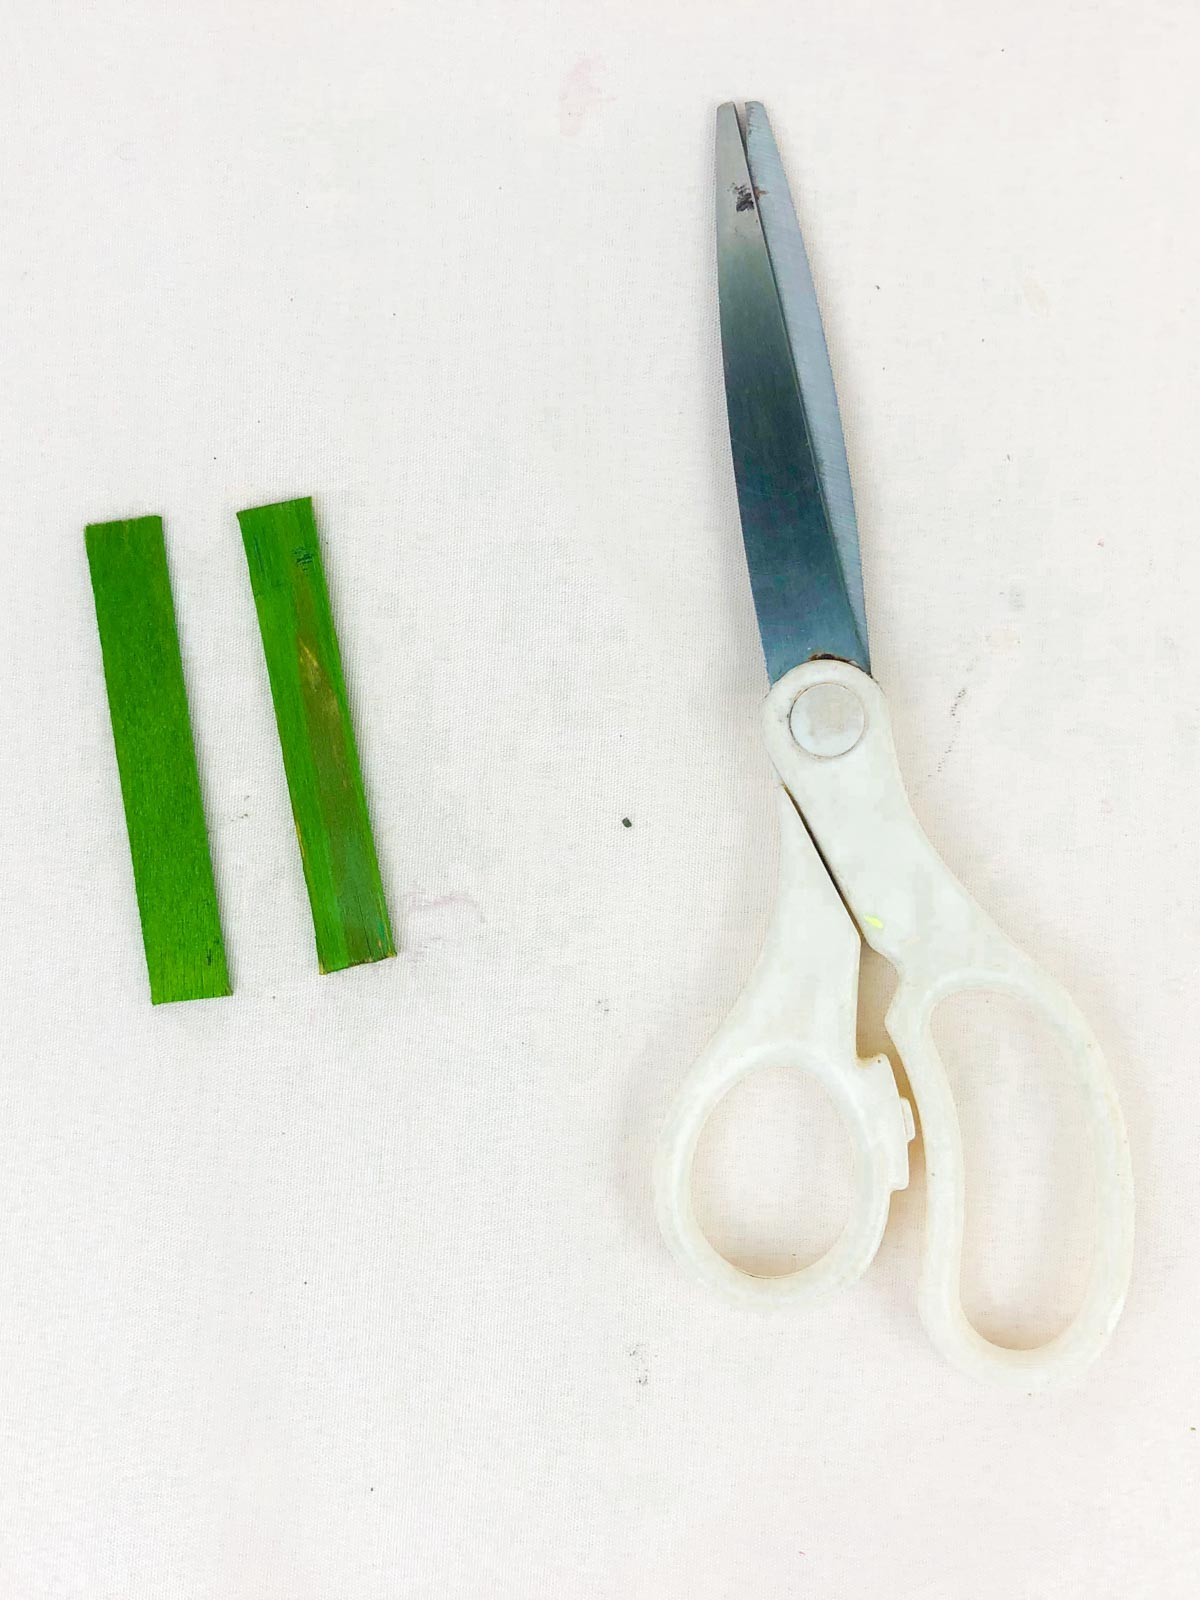 two pieces of green popsicle sticks with a pair of scissors